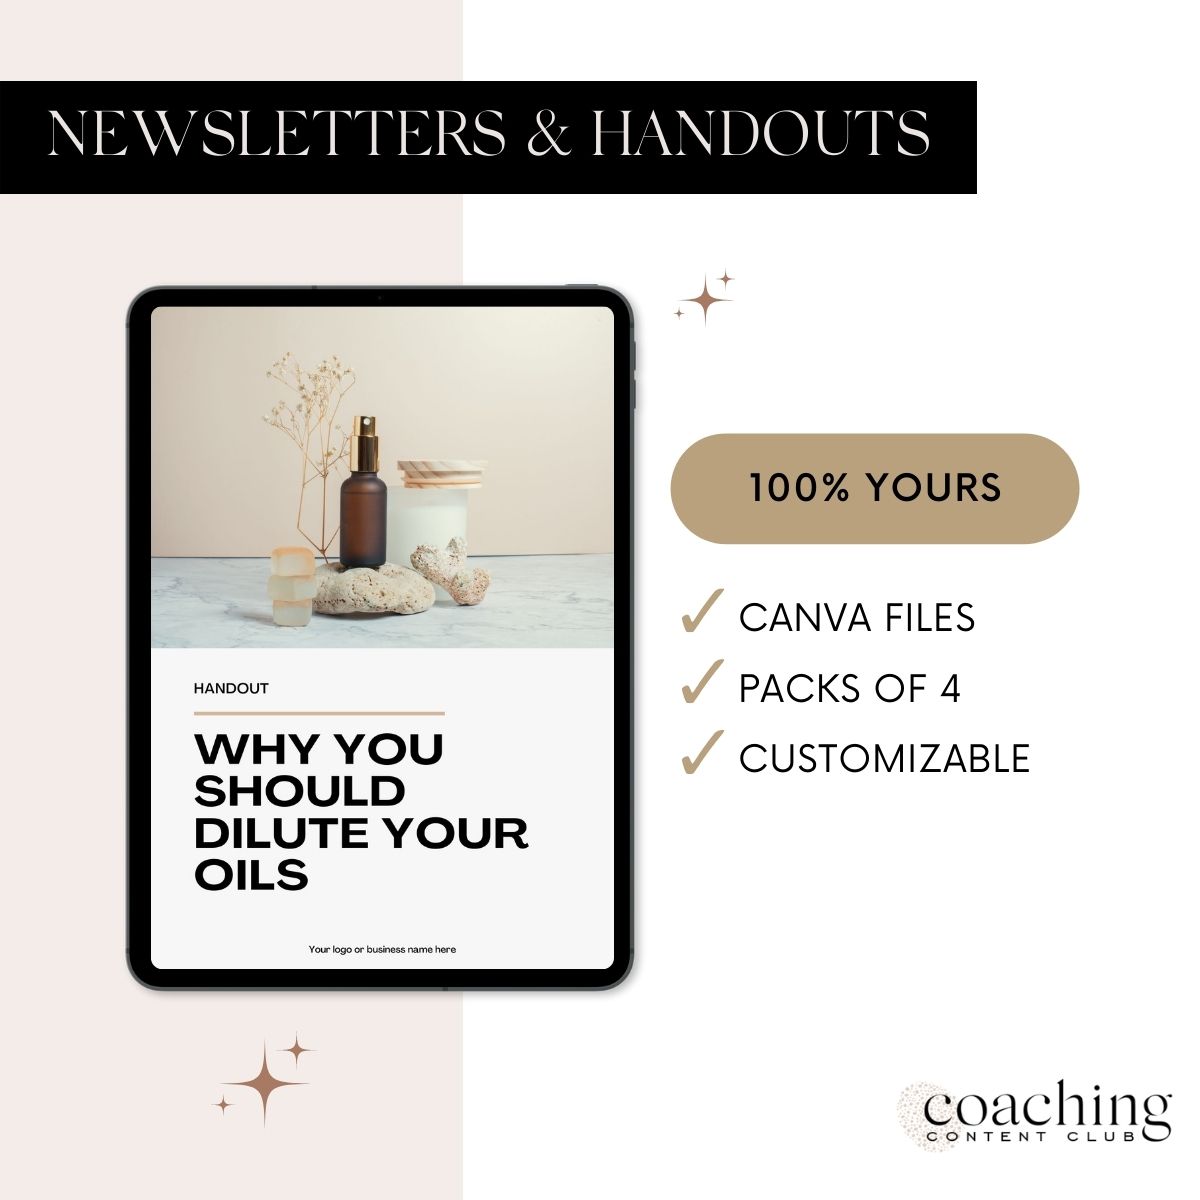 Newsletters and Handouts